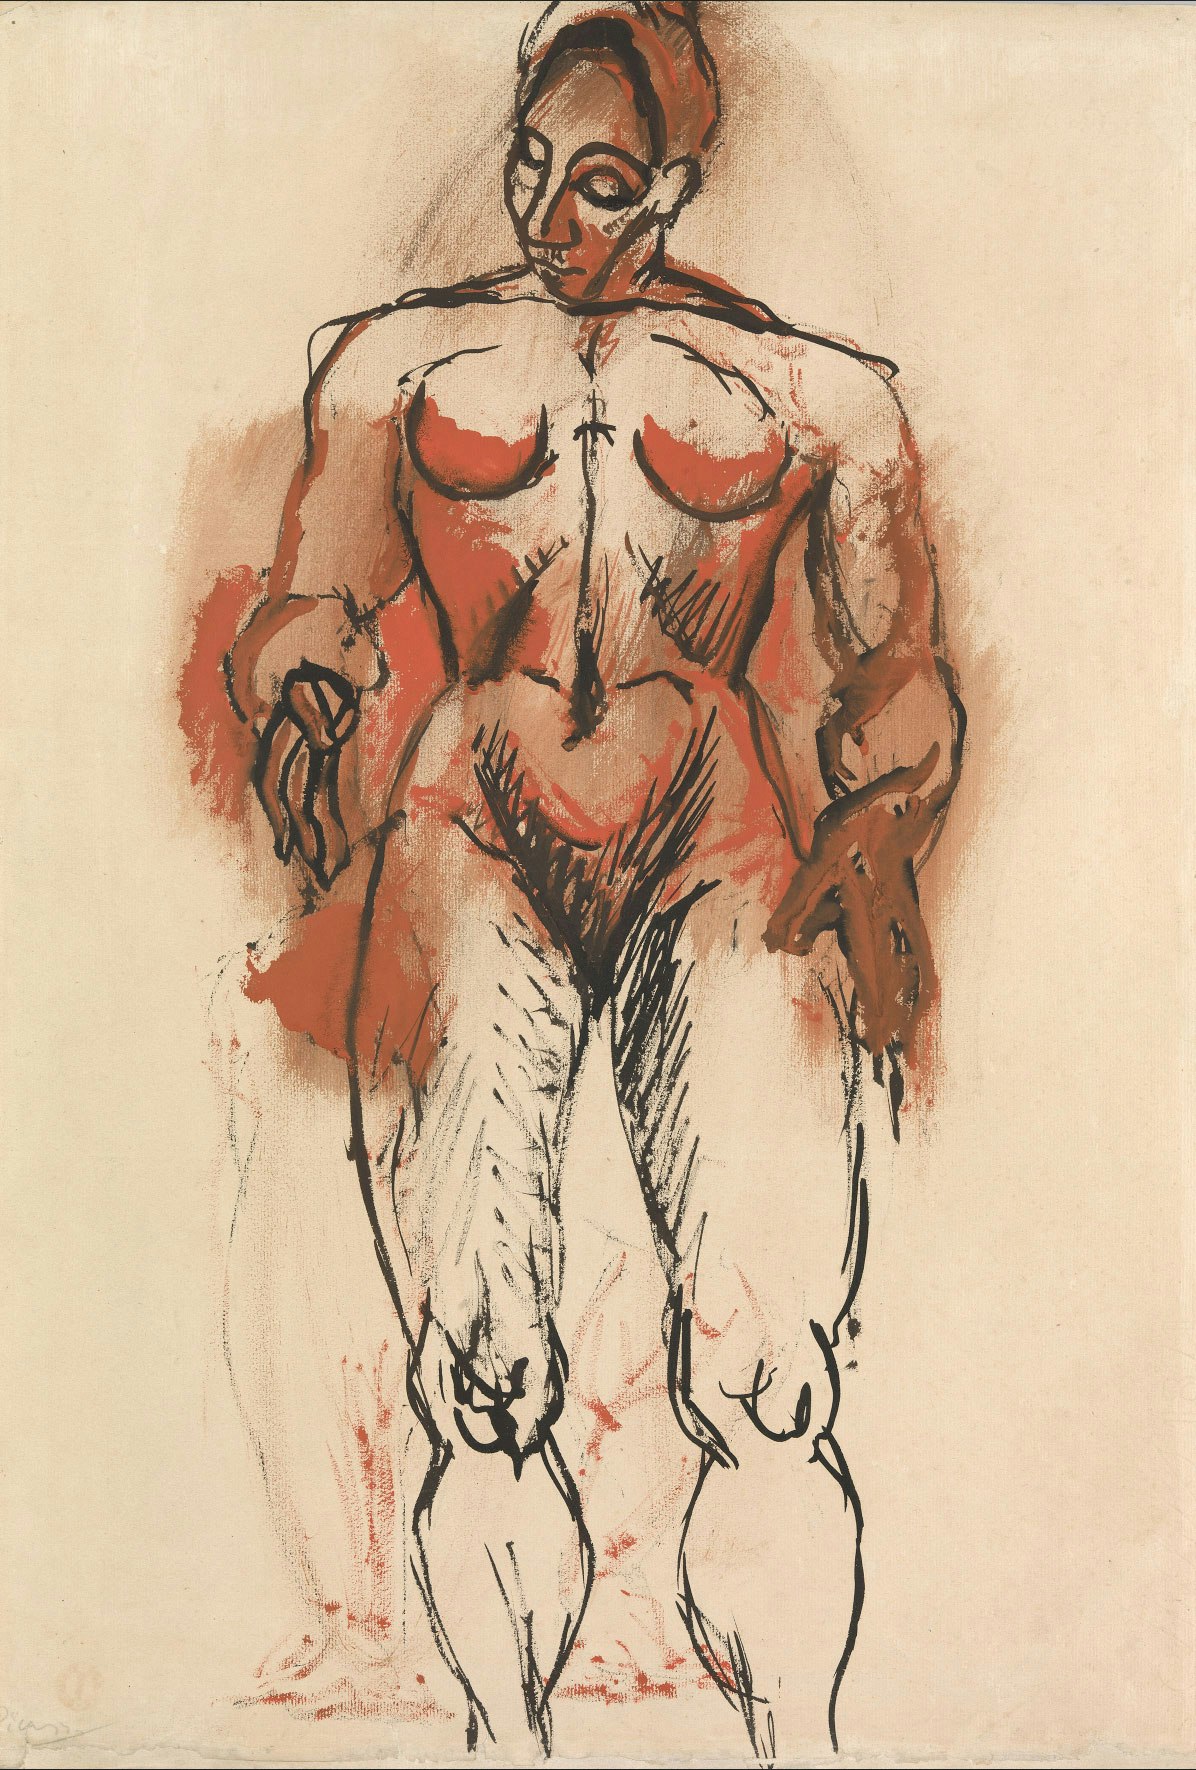 Pablo Picasso, <em>Femme nue debout [Standing Female Nude]</em>, 1906/1907. Ink and gouache on white laid paper 24 1/4 x 16 3/4 inches. The Metropolitan Museum of Art, New York.